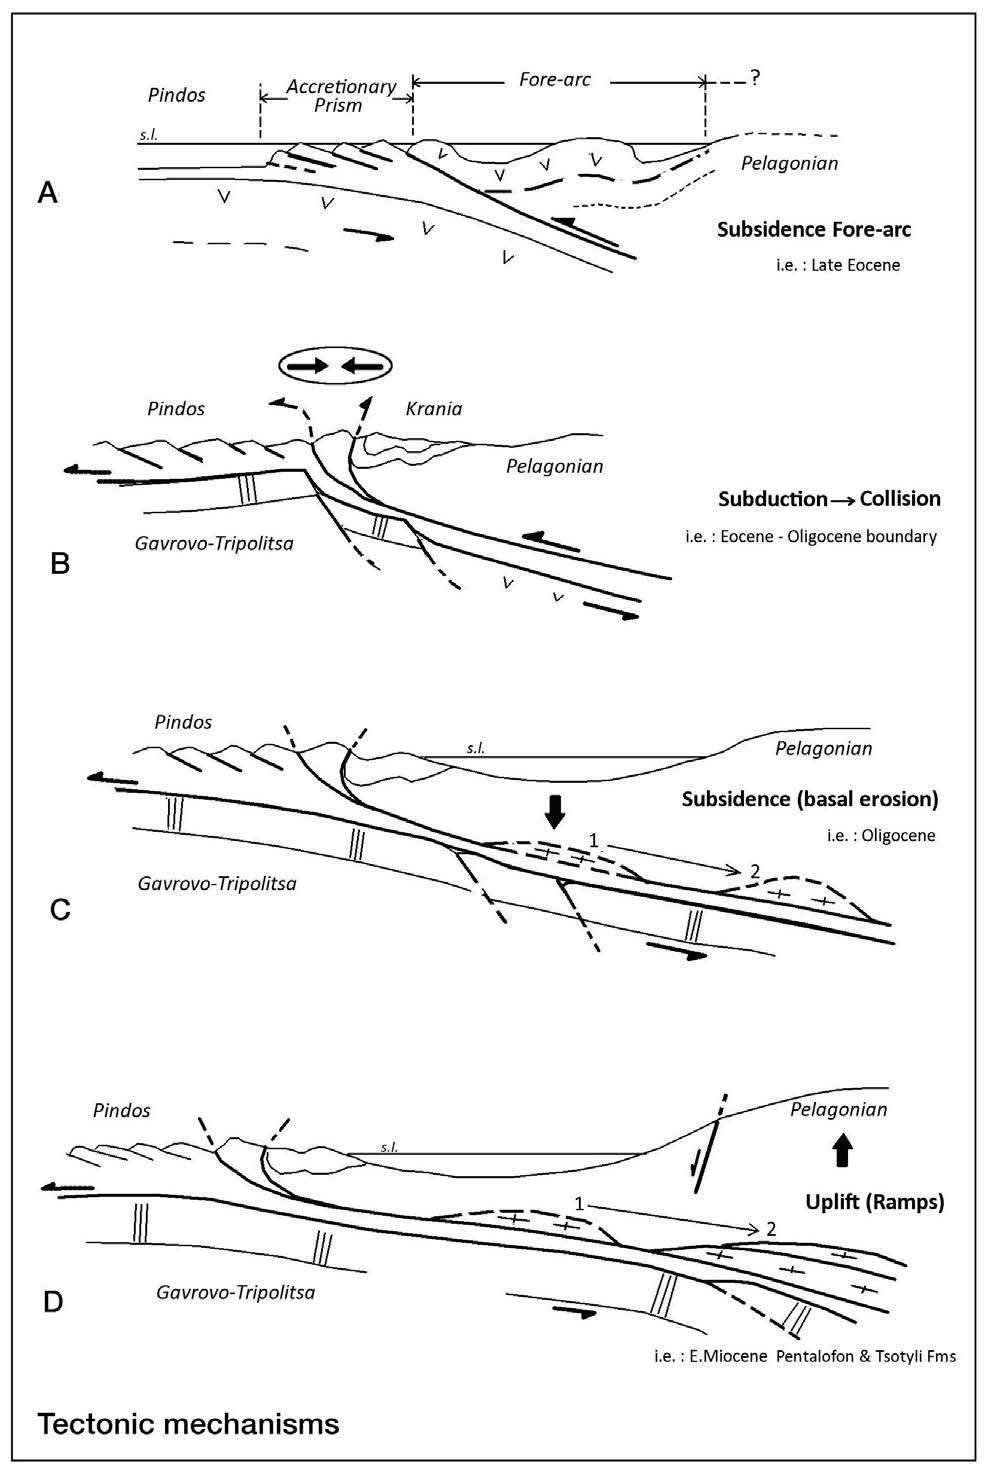 Main tectonic mechanisms supposed to have controlled the piggyback MHB evolution.